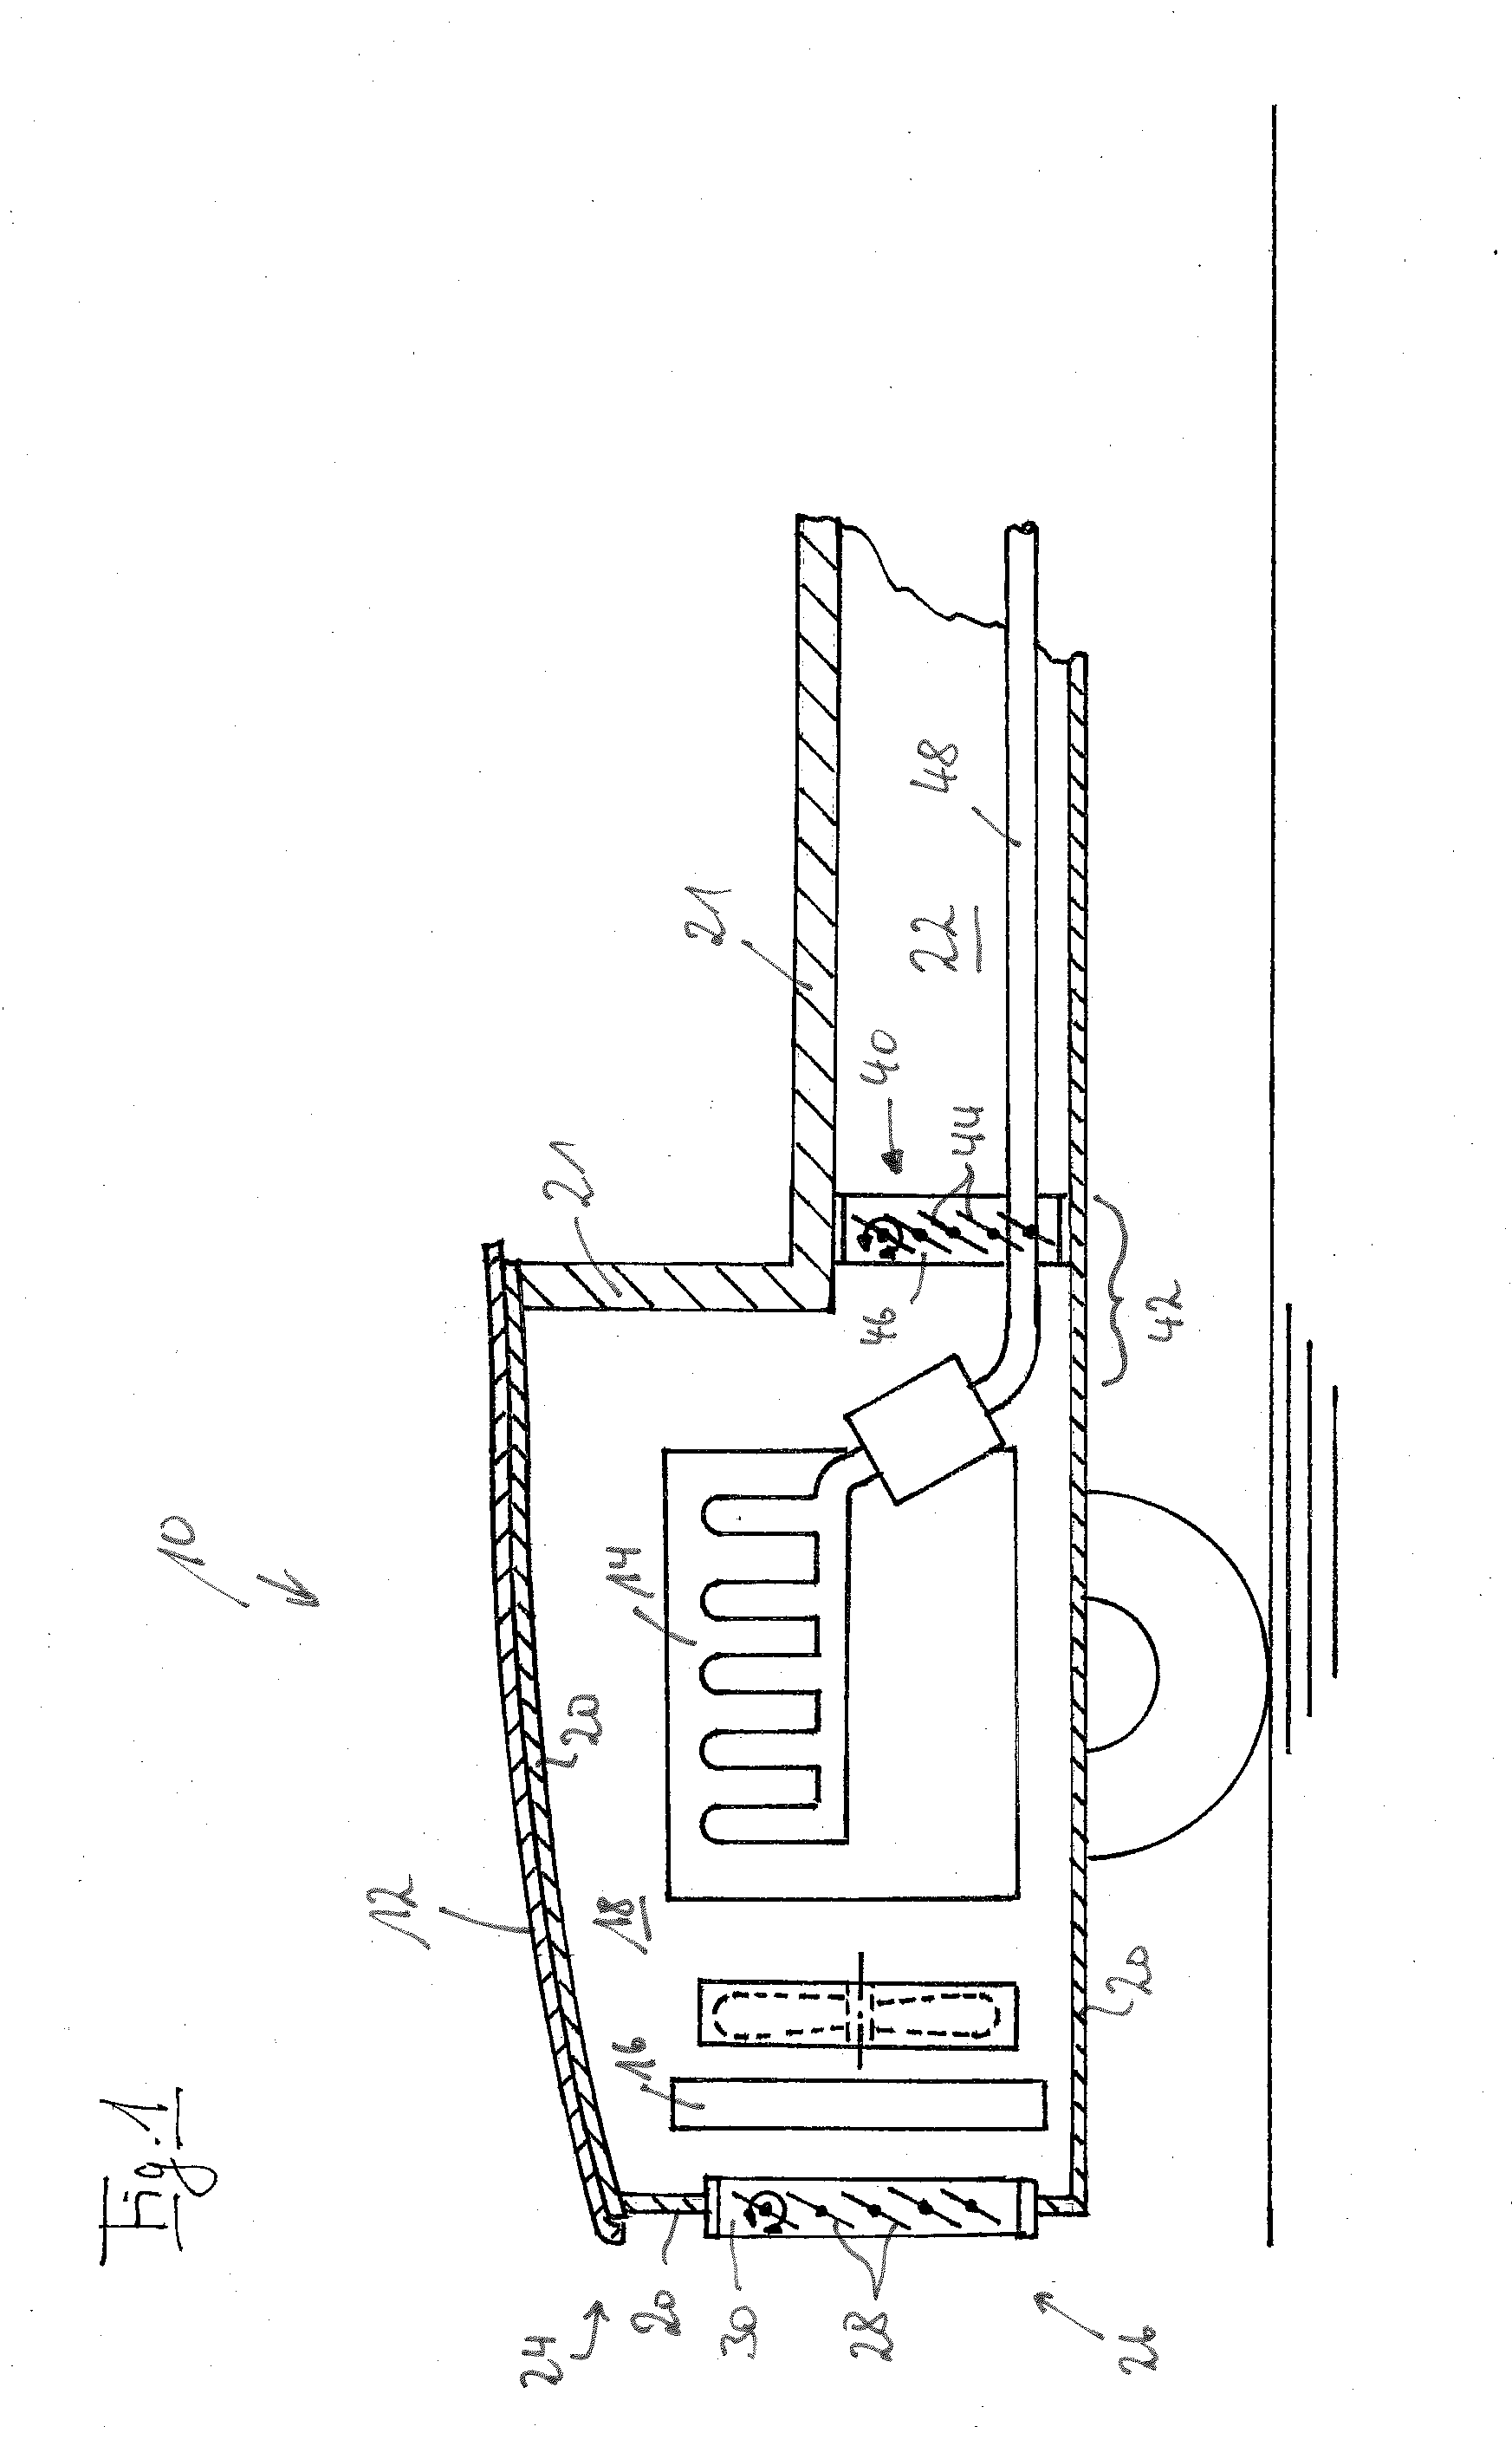 Operating space with a preferably thermally and acoustically insulating enclosure, and air louver arrangement which cooperates with said operating space